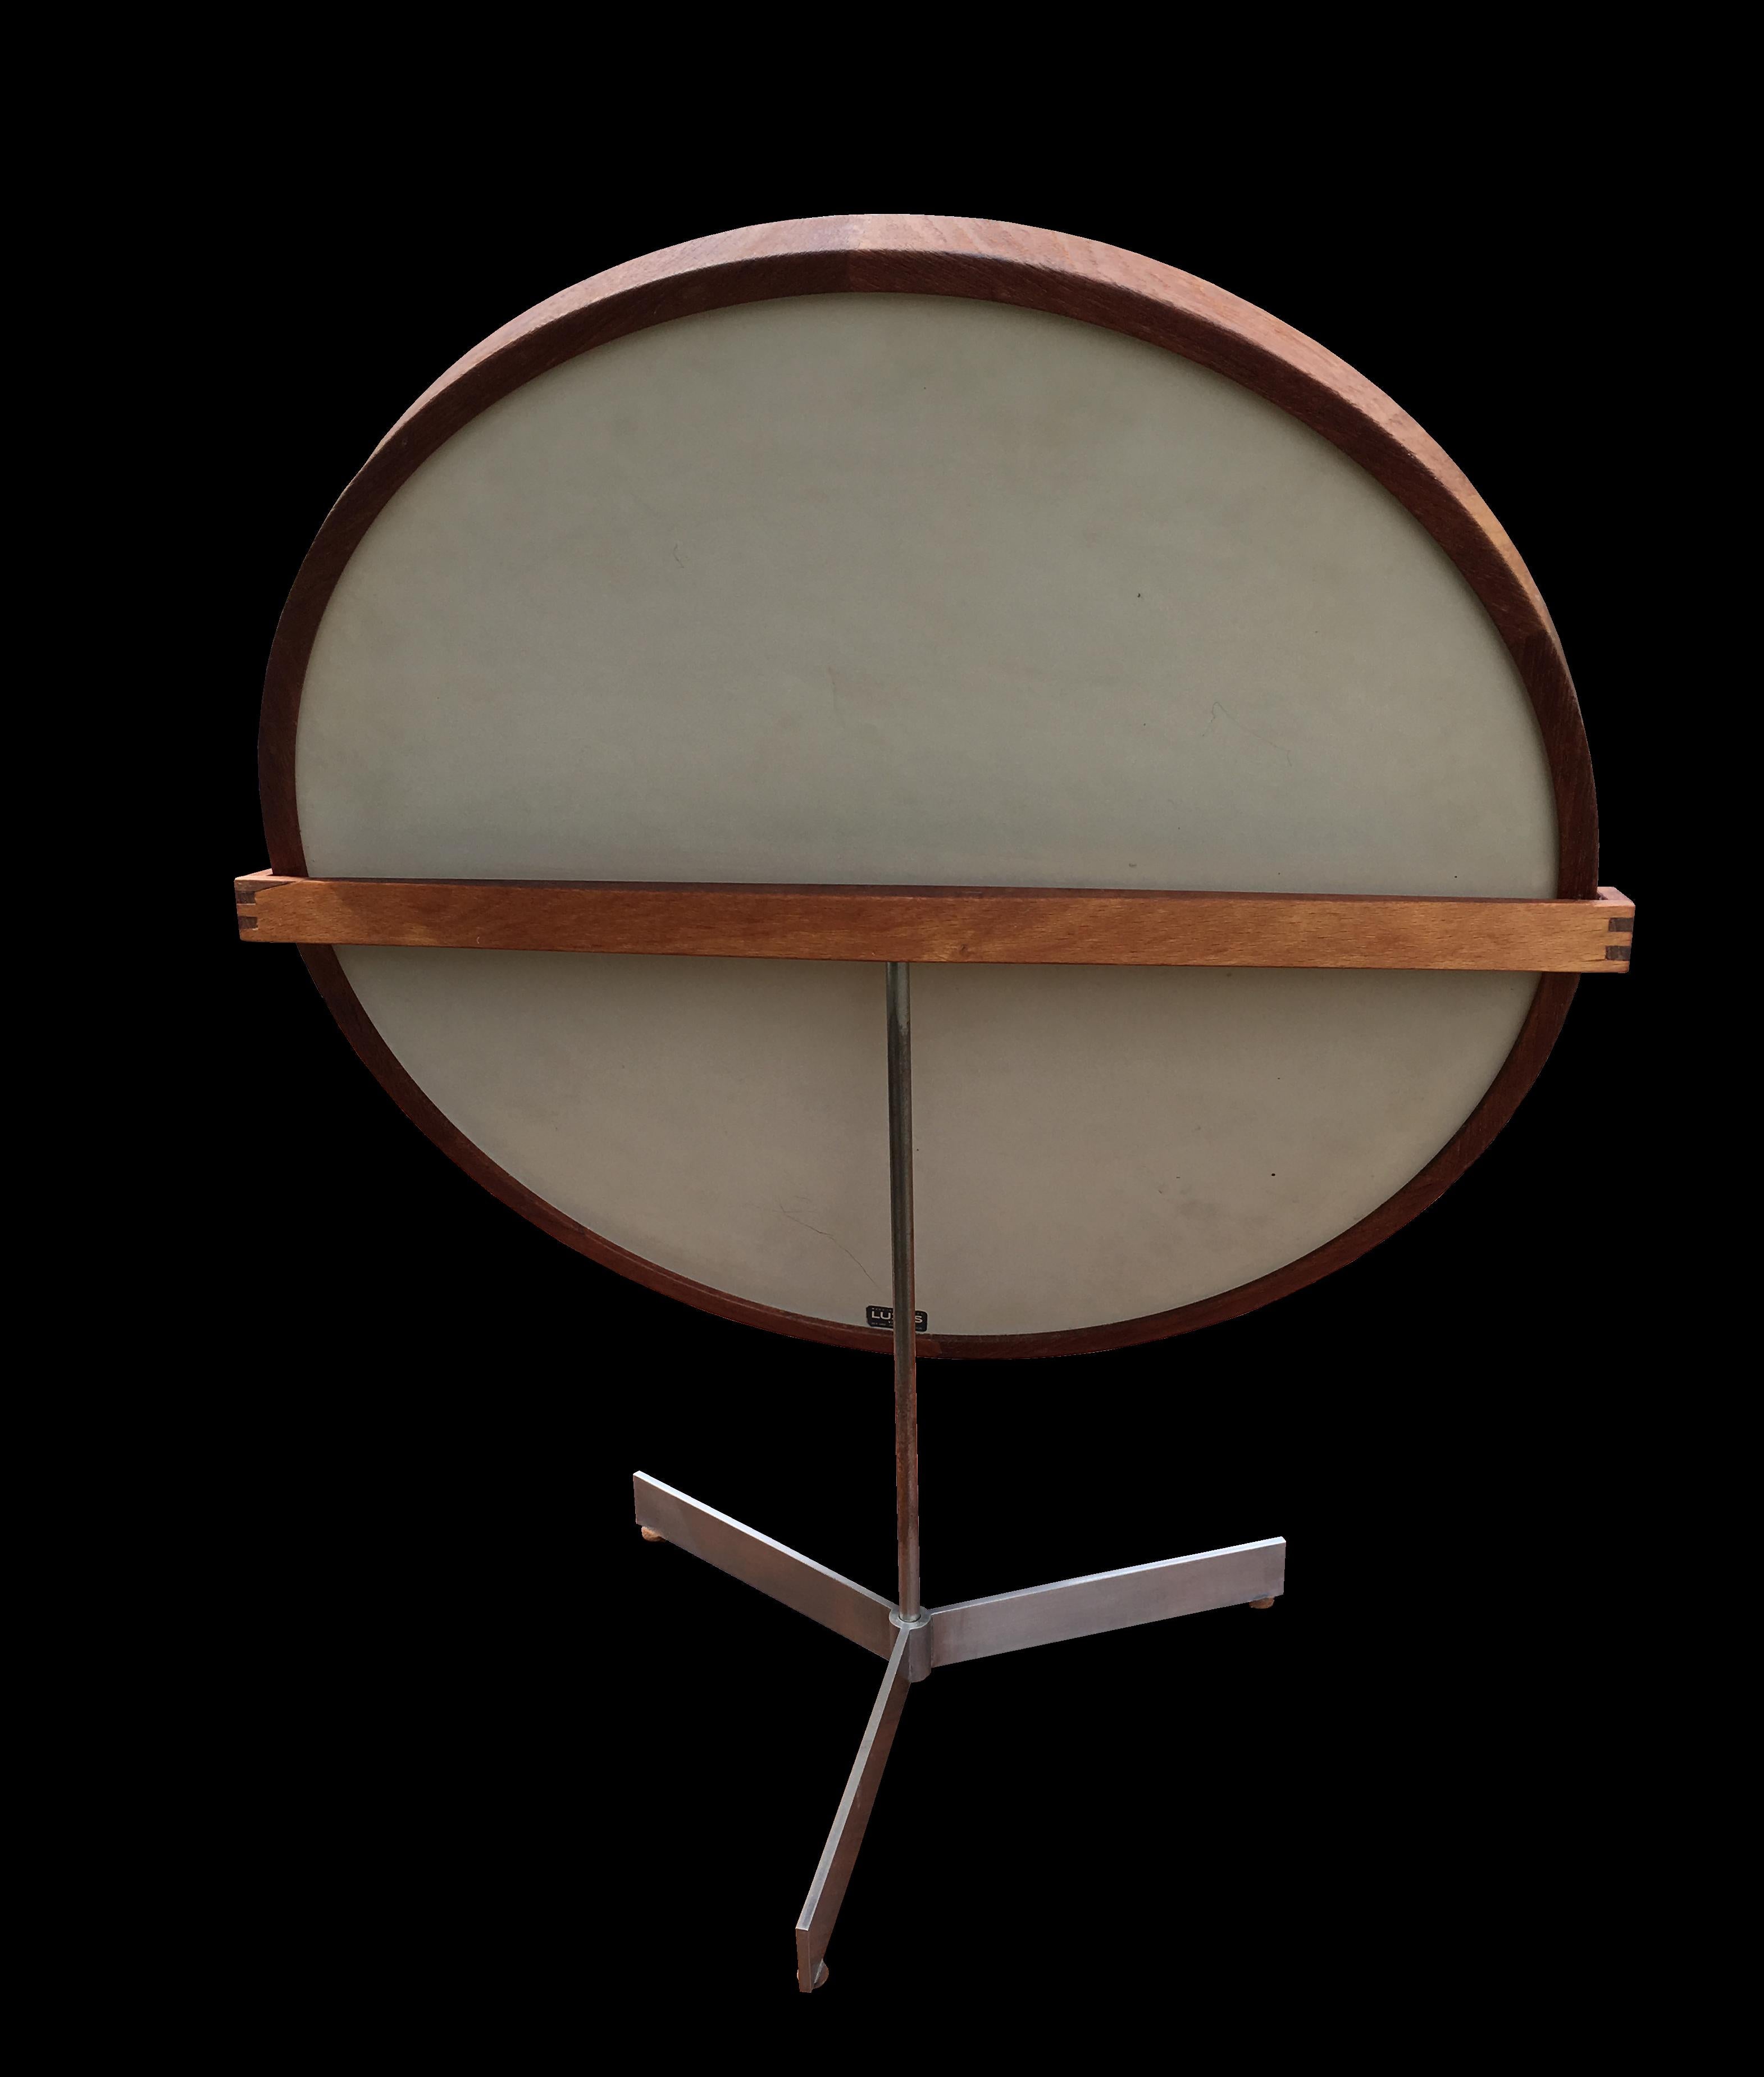 Scandinavian Modern Pao Ferro and Stainless Steel Mirror by Uno and Osten Kristiansson for Luxus